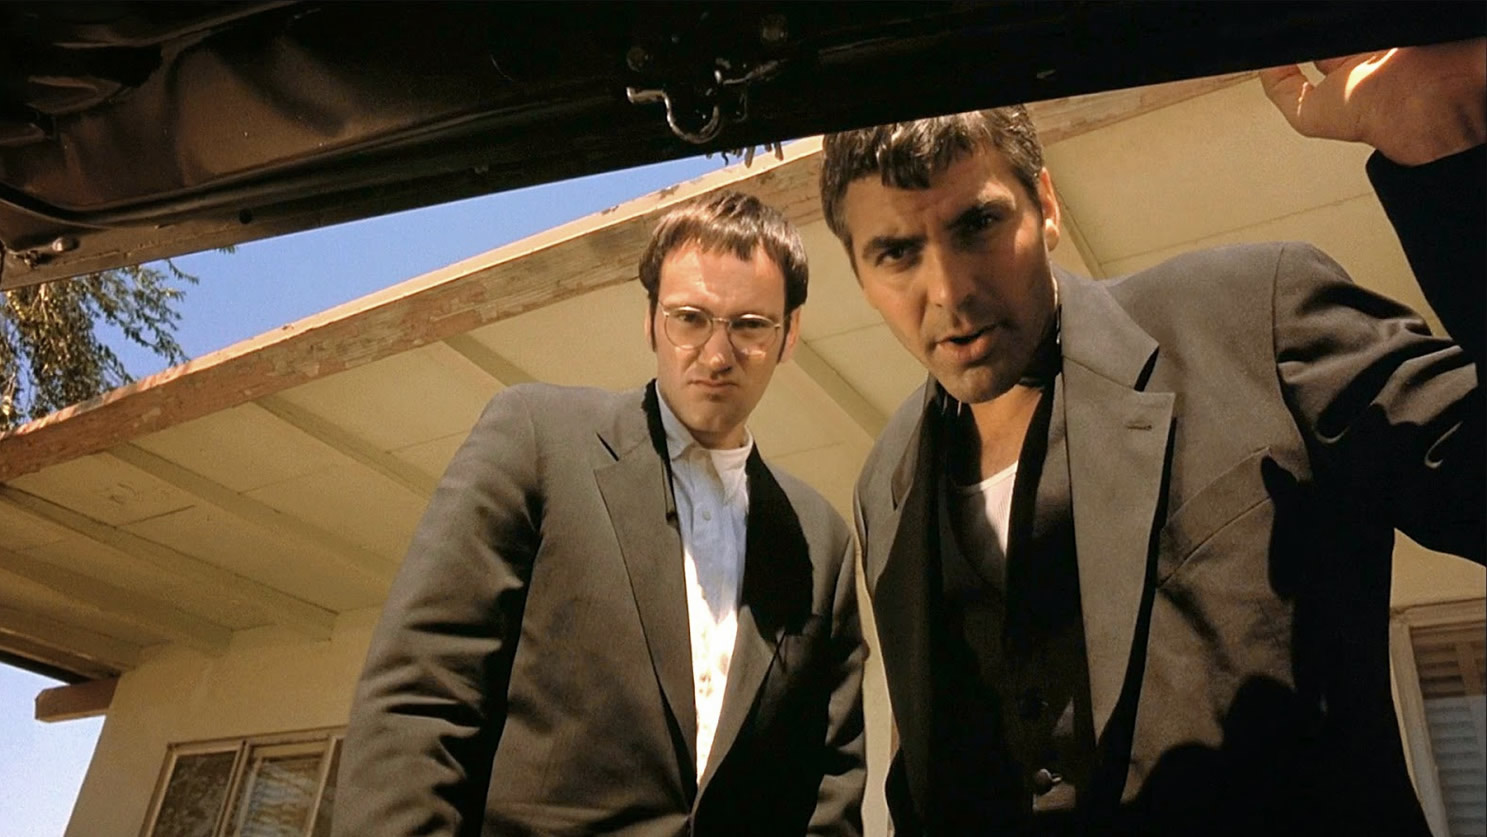 quentin tarantino and george clooney in From Dusk till Dawn, trunk shot, low angle shot